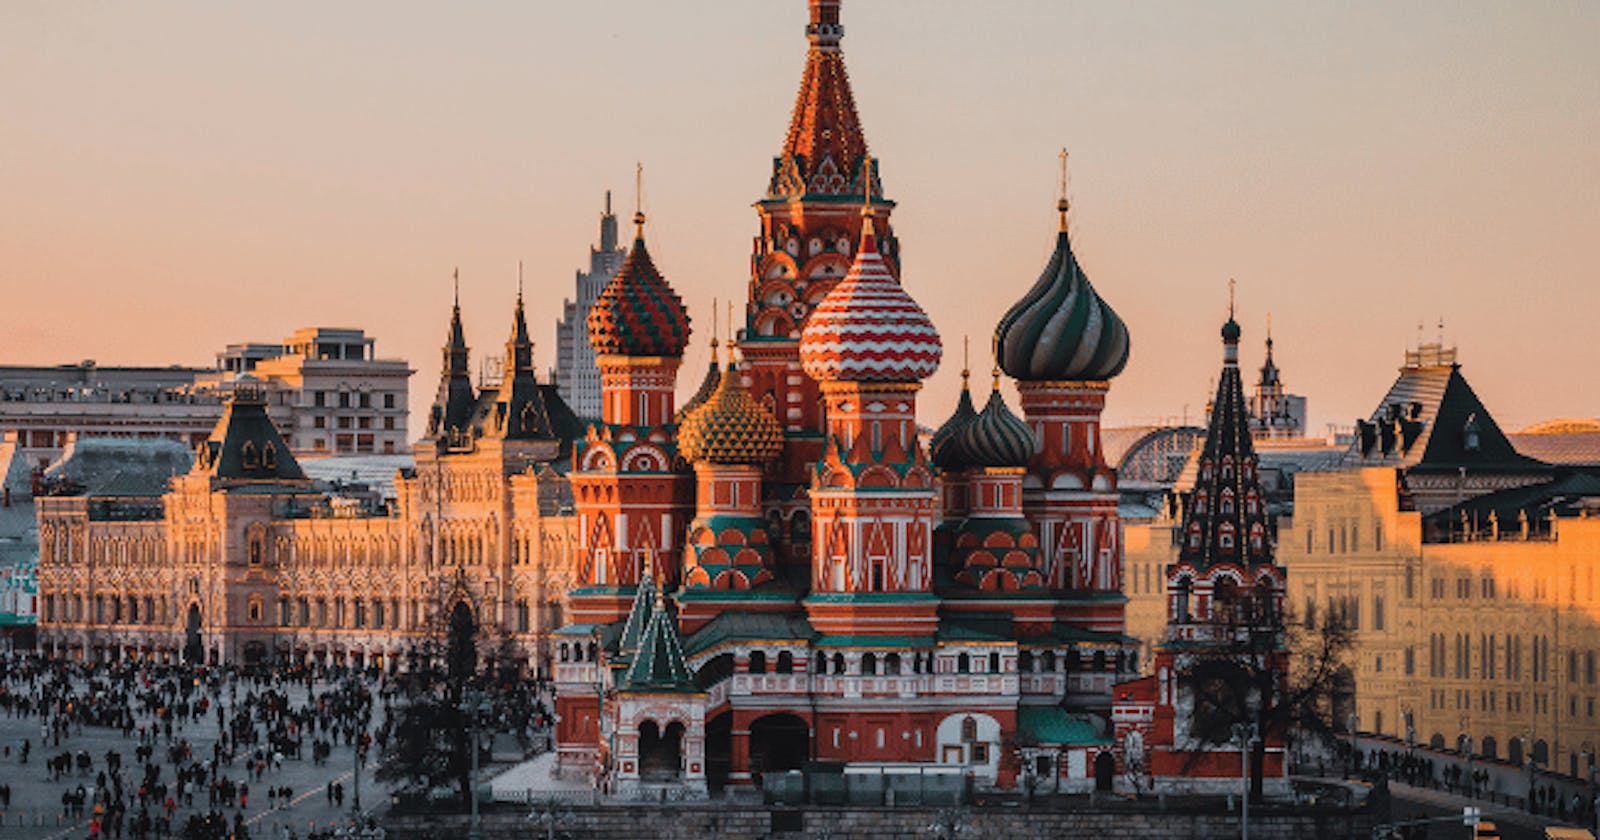 From Red Square to the Kremlin: Must-See Landmarks in Moscow